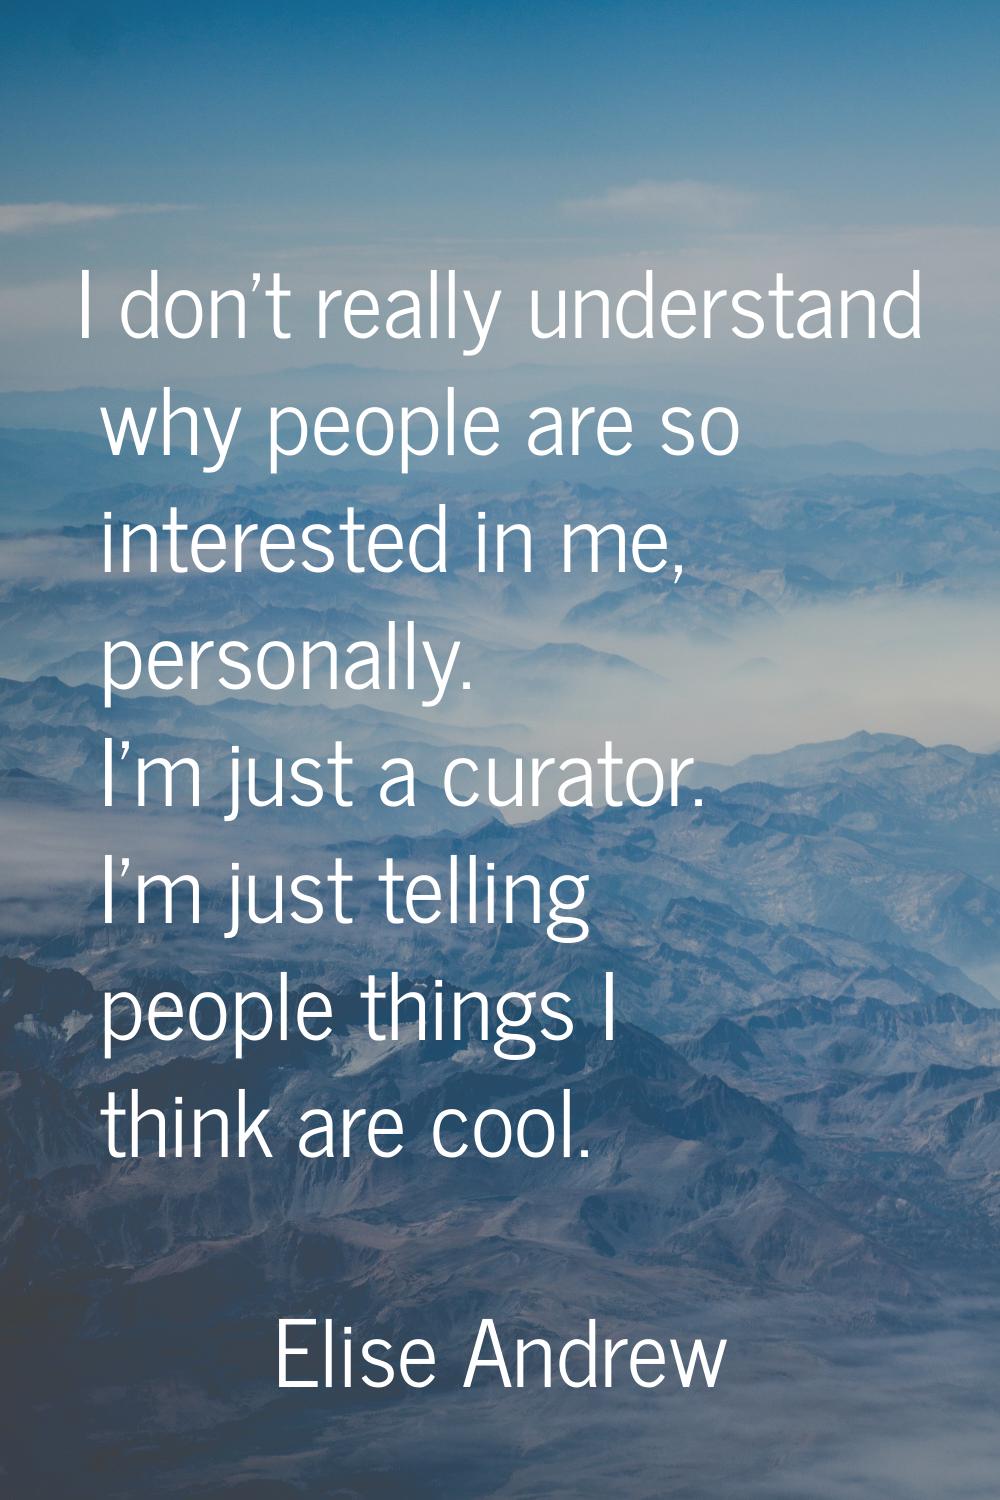 I don't really understand why people are so interested in me, personally. I'm just a curator. I'm j